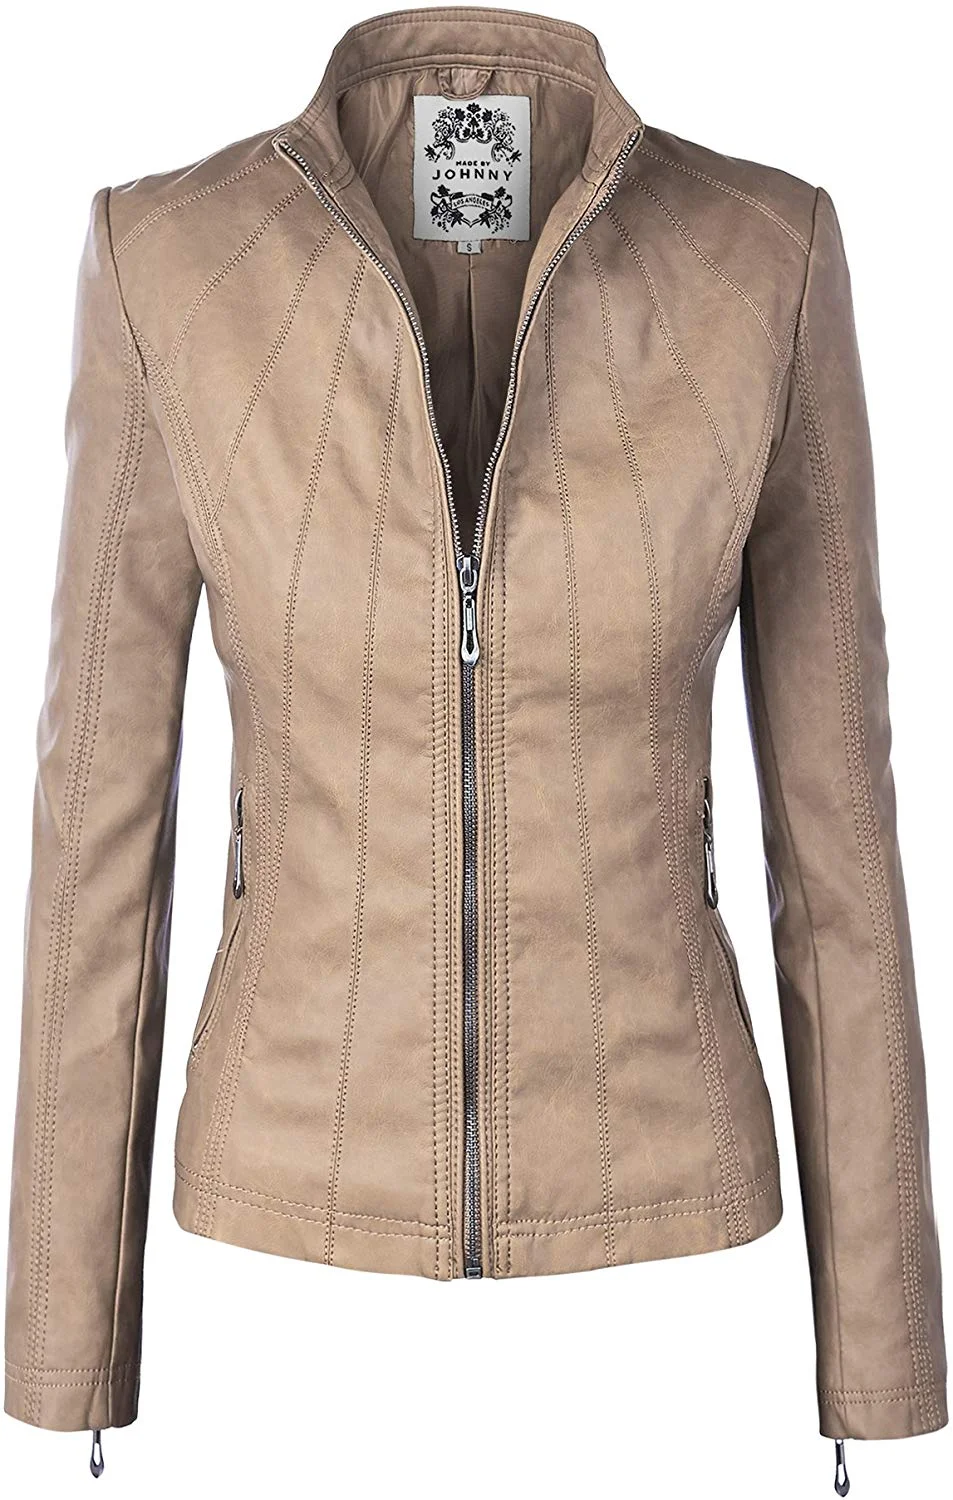 Made By Johnny Womens Faux Leather Zip Up Moto Biker Jacket with Stitching Detail